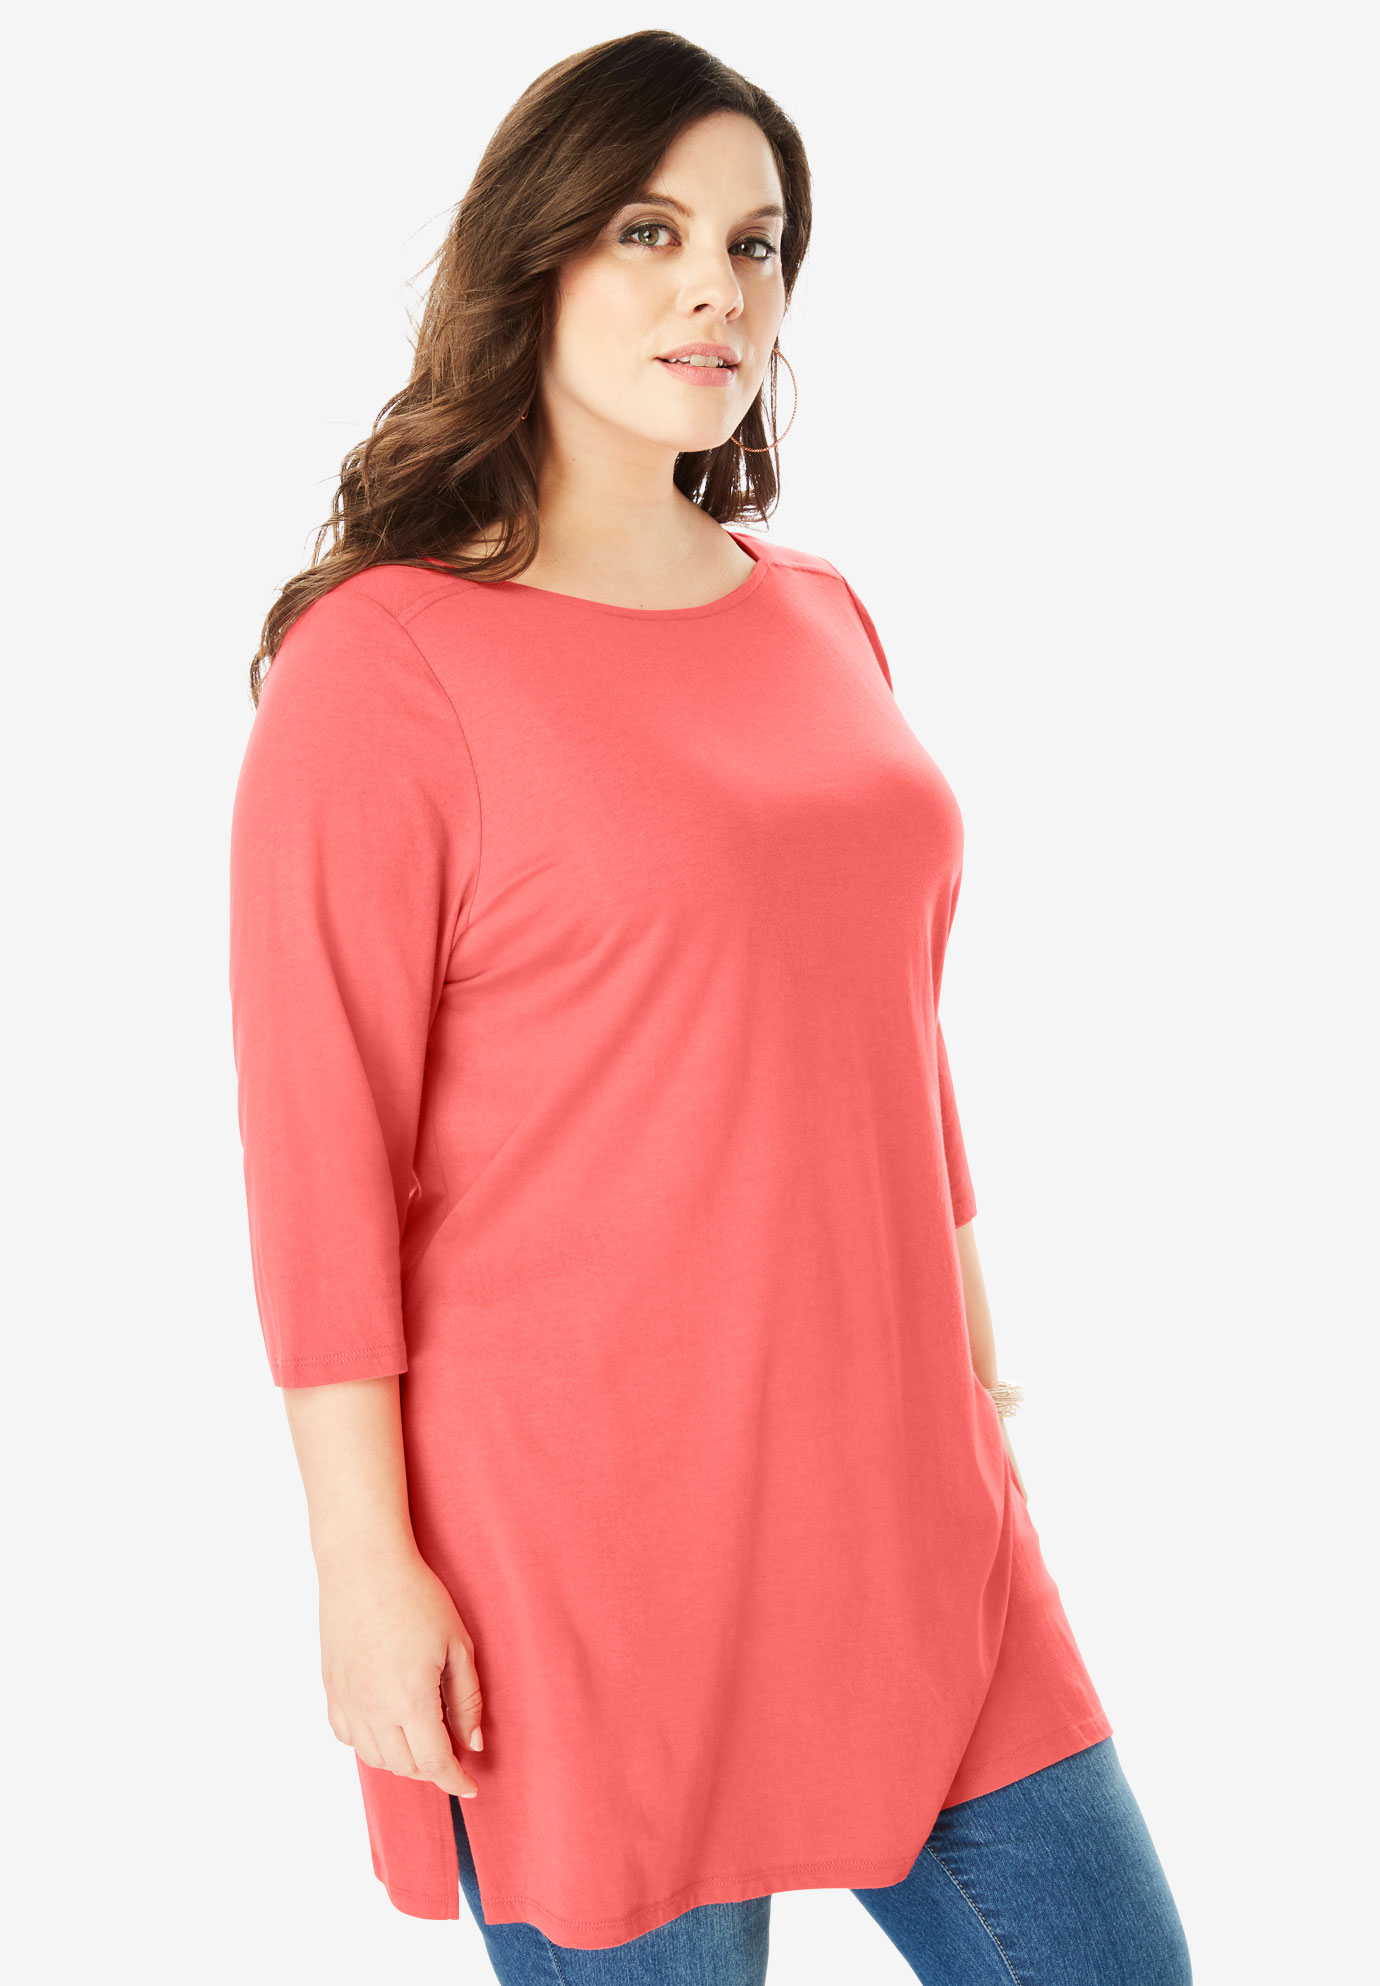 Boatneck Ultimate Tunic with Side Slits | Plus Size 34 Inches Long ...